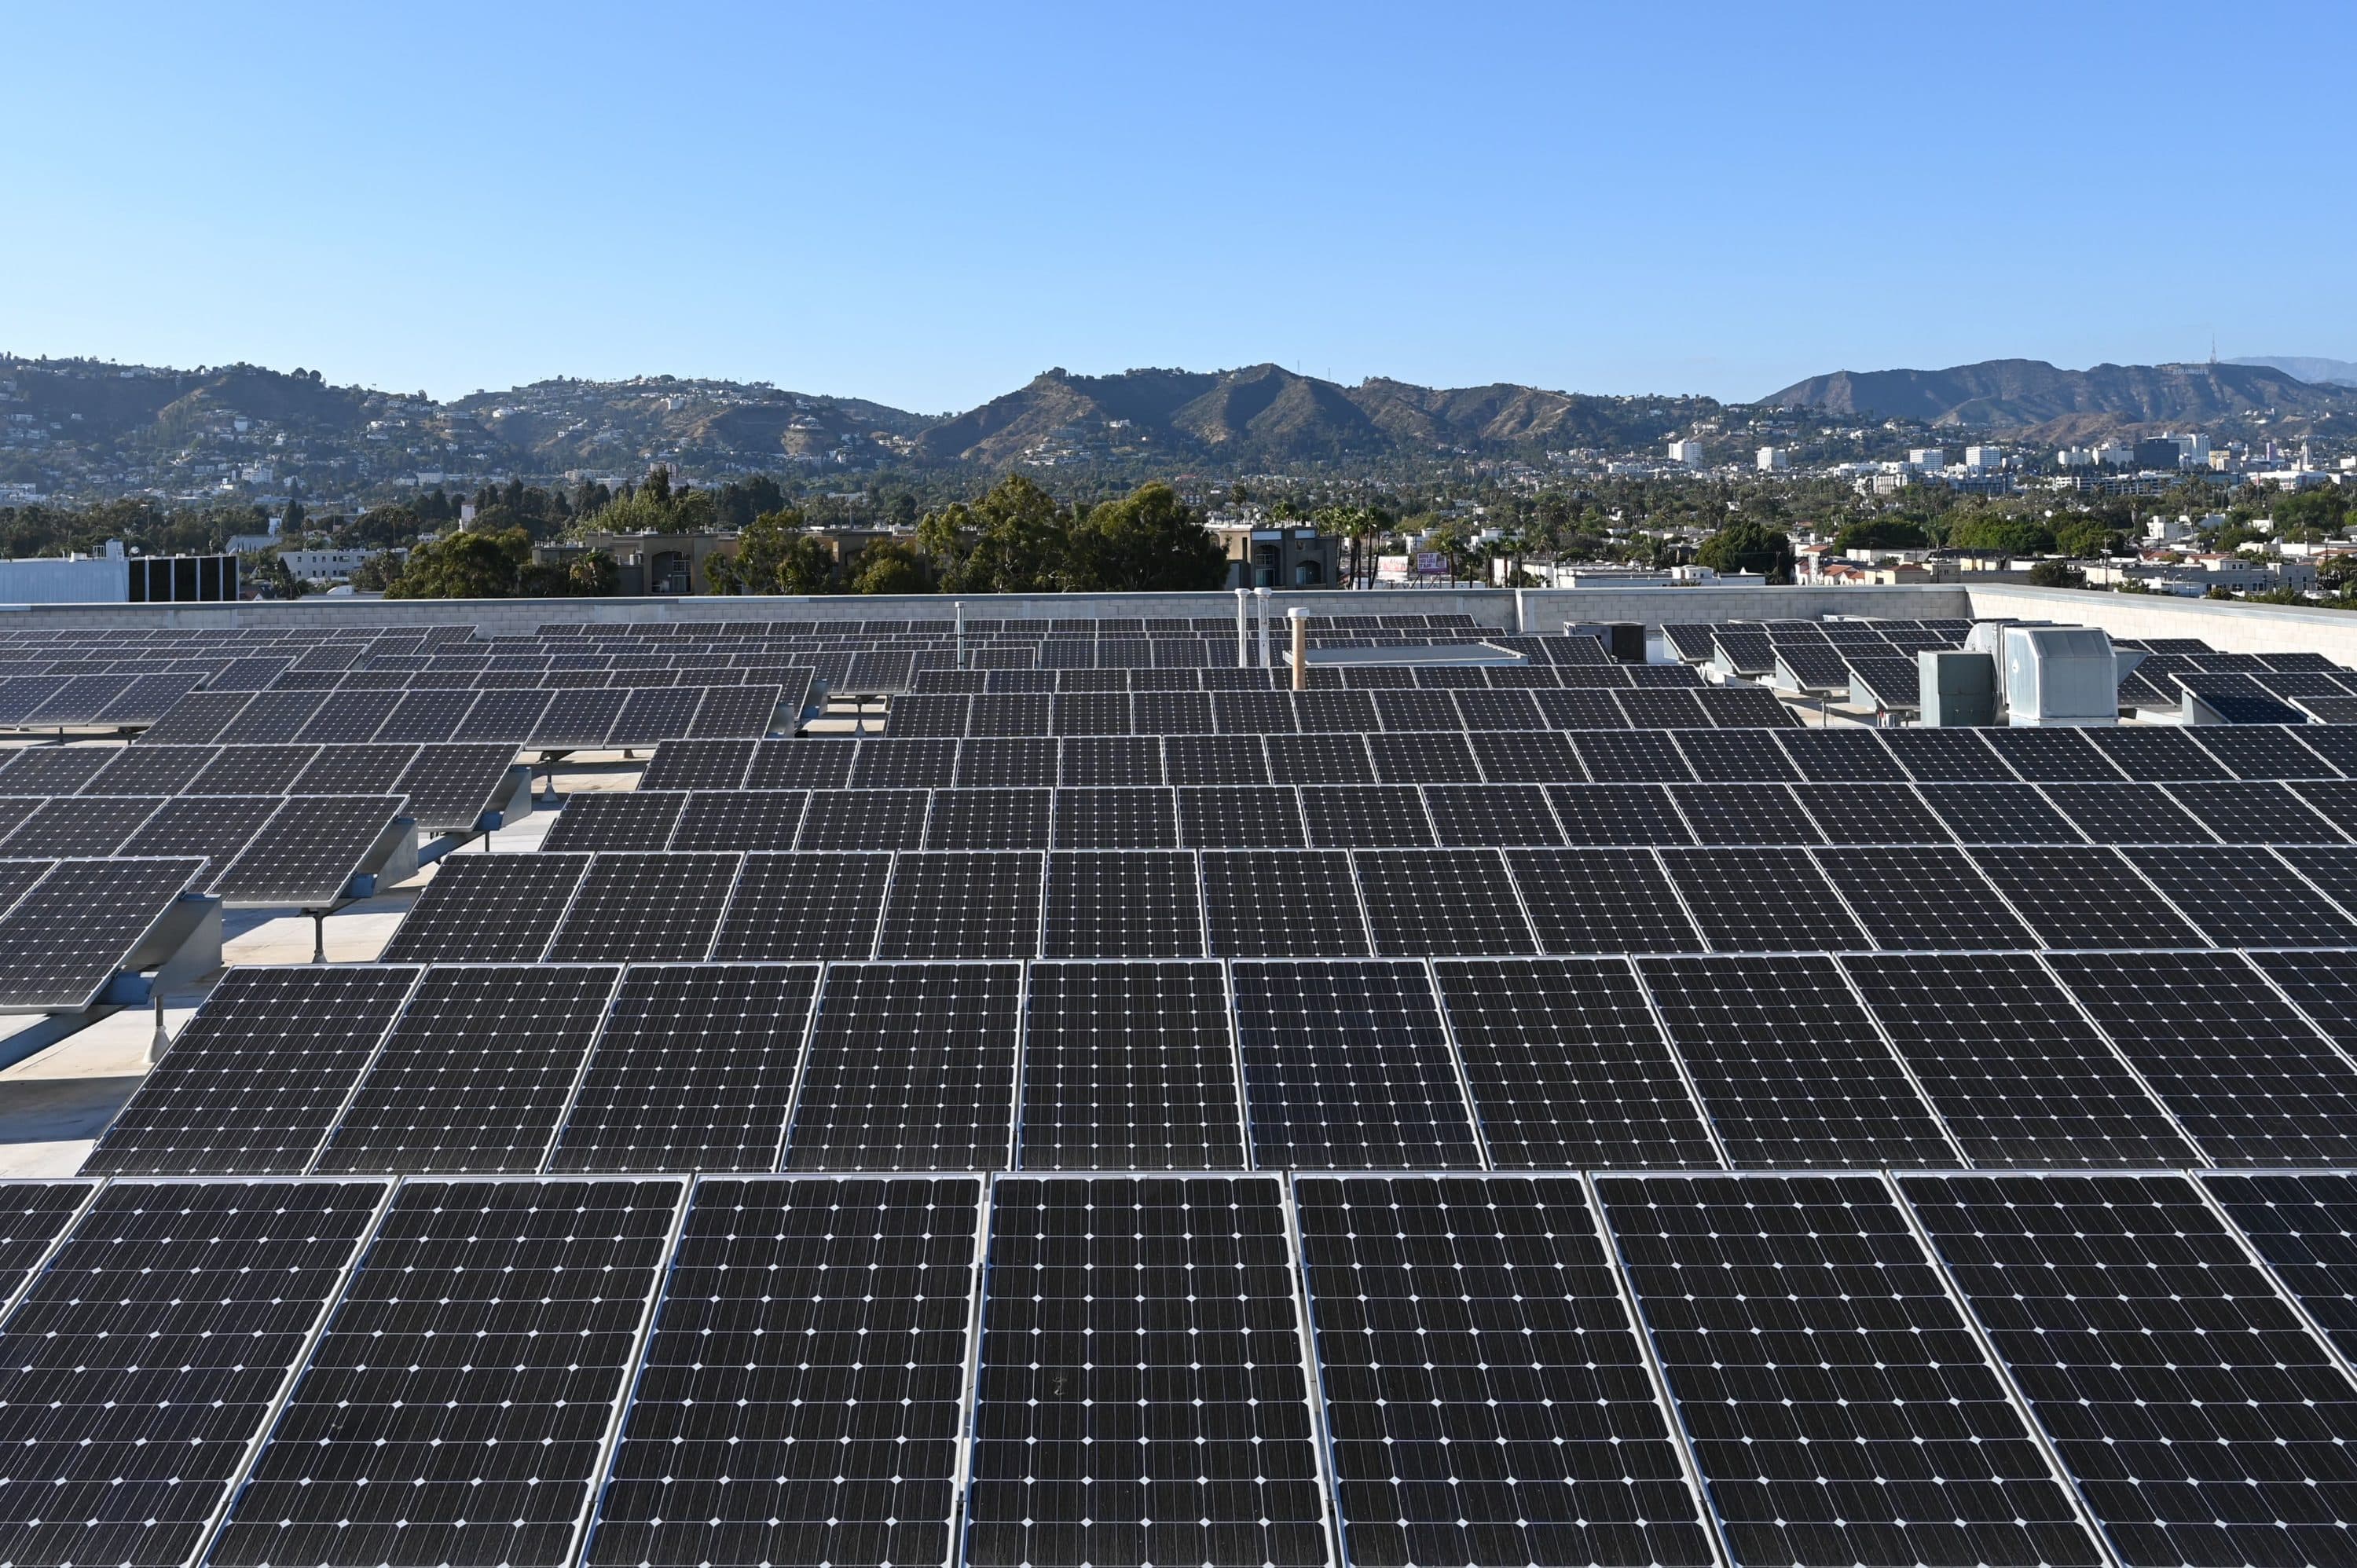 Solar panels are seen on the roof of a building in Los Angeles, California, on June 18 2022. (Photo by Daniel Slim/AFP via Getty Images)